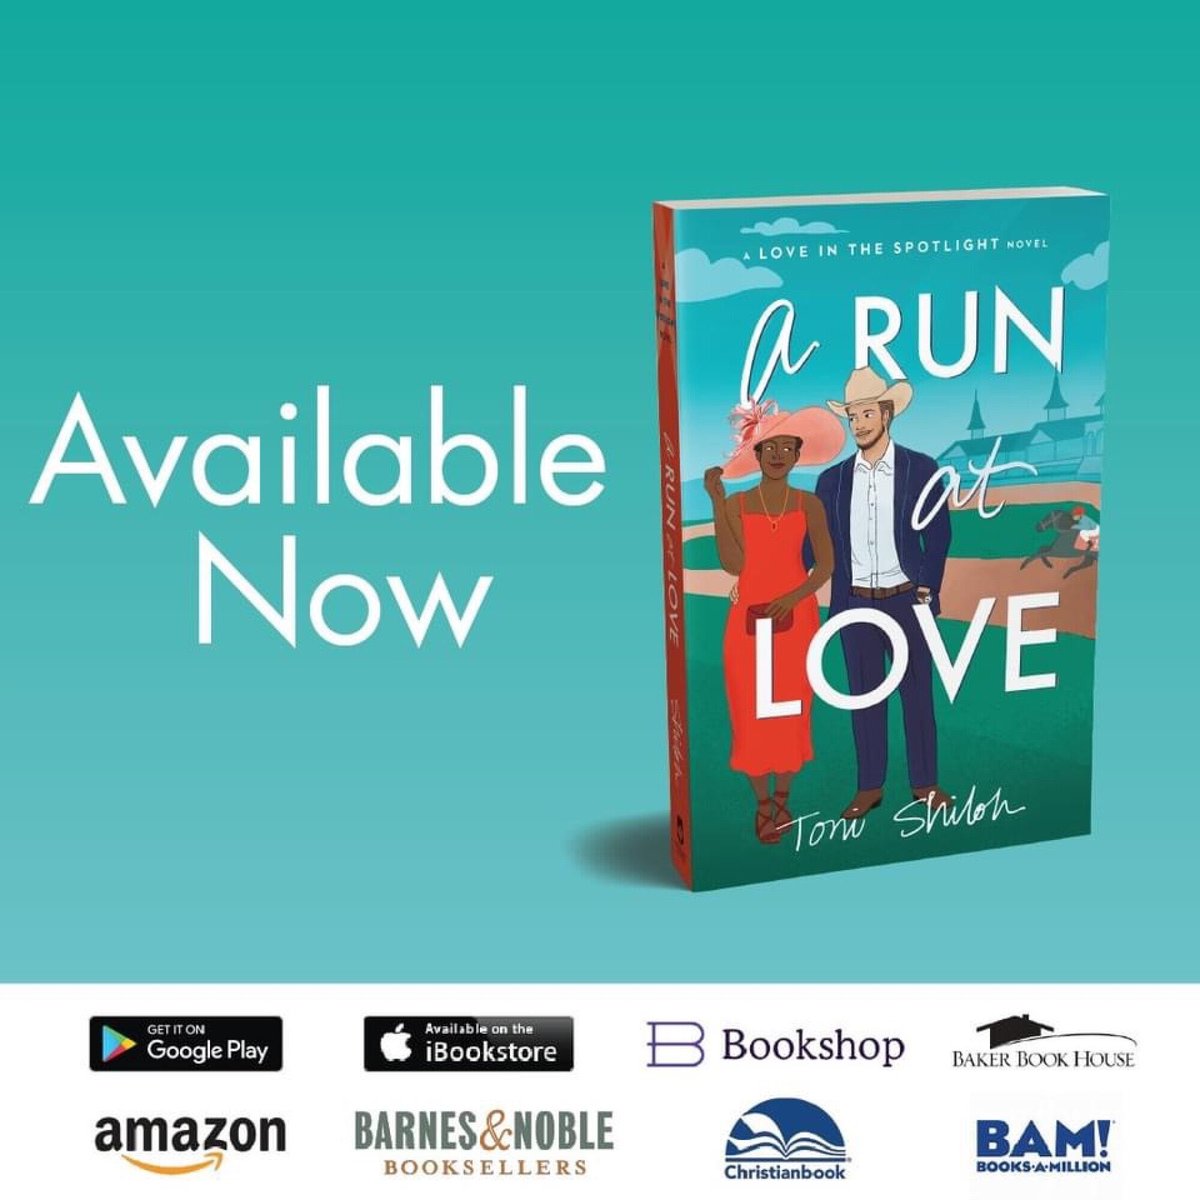 Calling all horse lovers! 🐎
A Run at Love by @tonishilohwrite just released today.  You'll enjoy this contemporary romance read with diverse characters, friends to more trope, an interracial couple, and horses. 
#stepintoashilohbook #diversereads #diversecharacters #tonishiloh